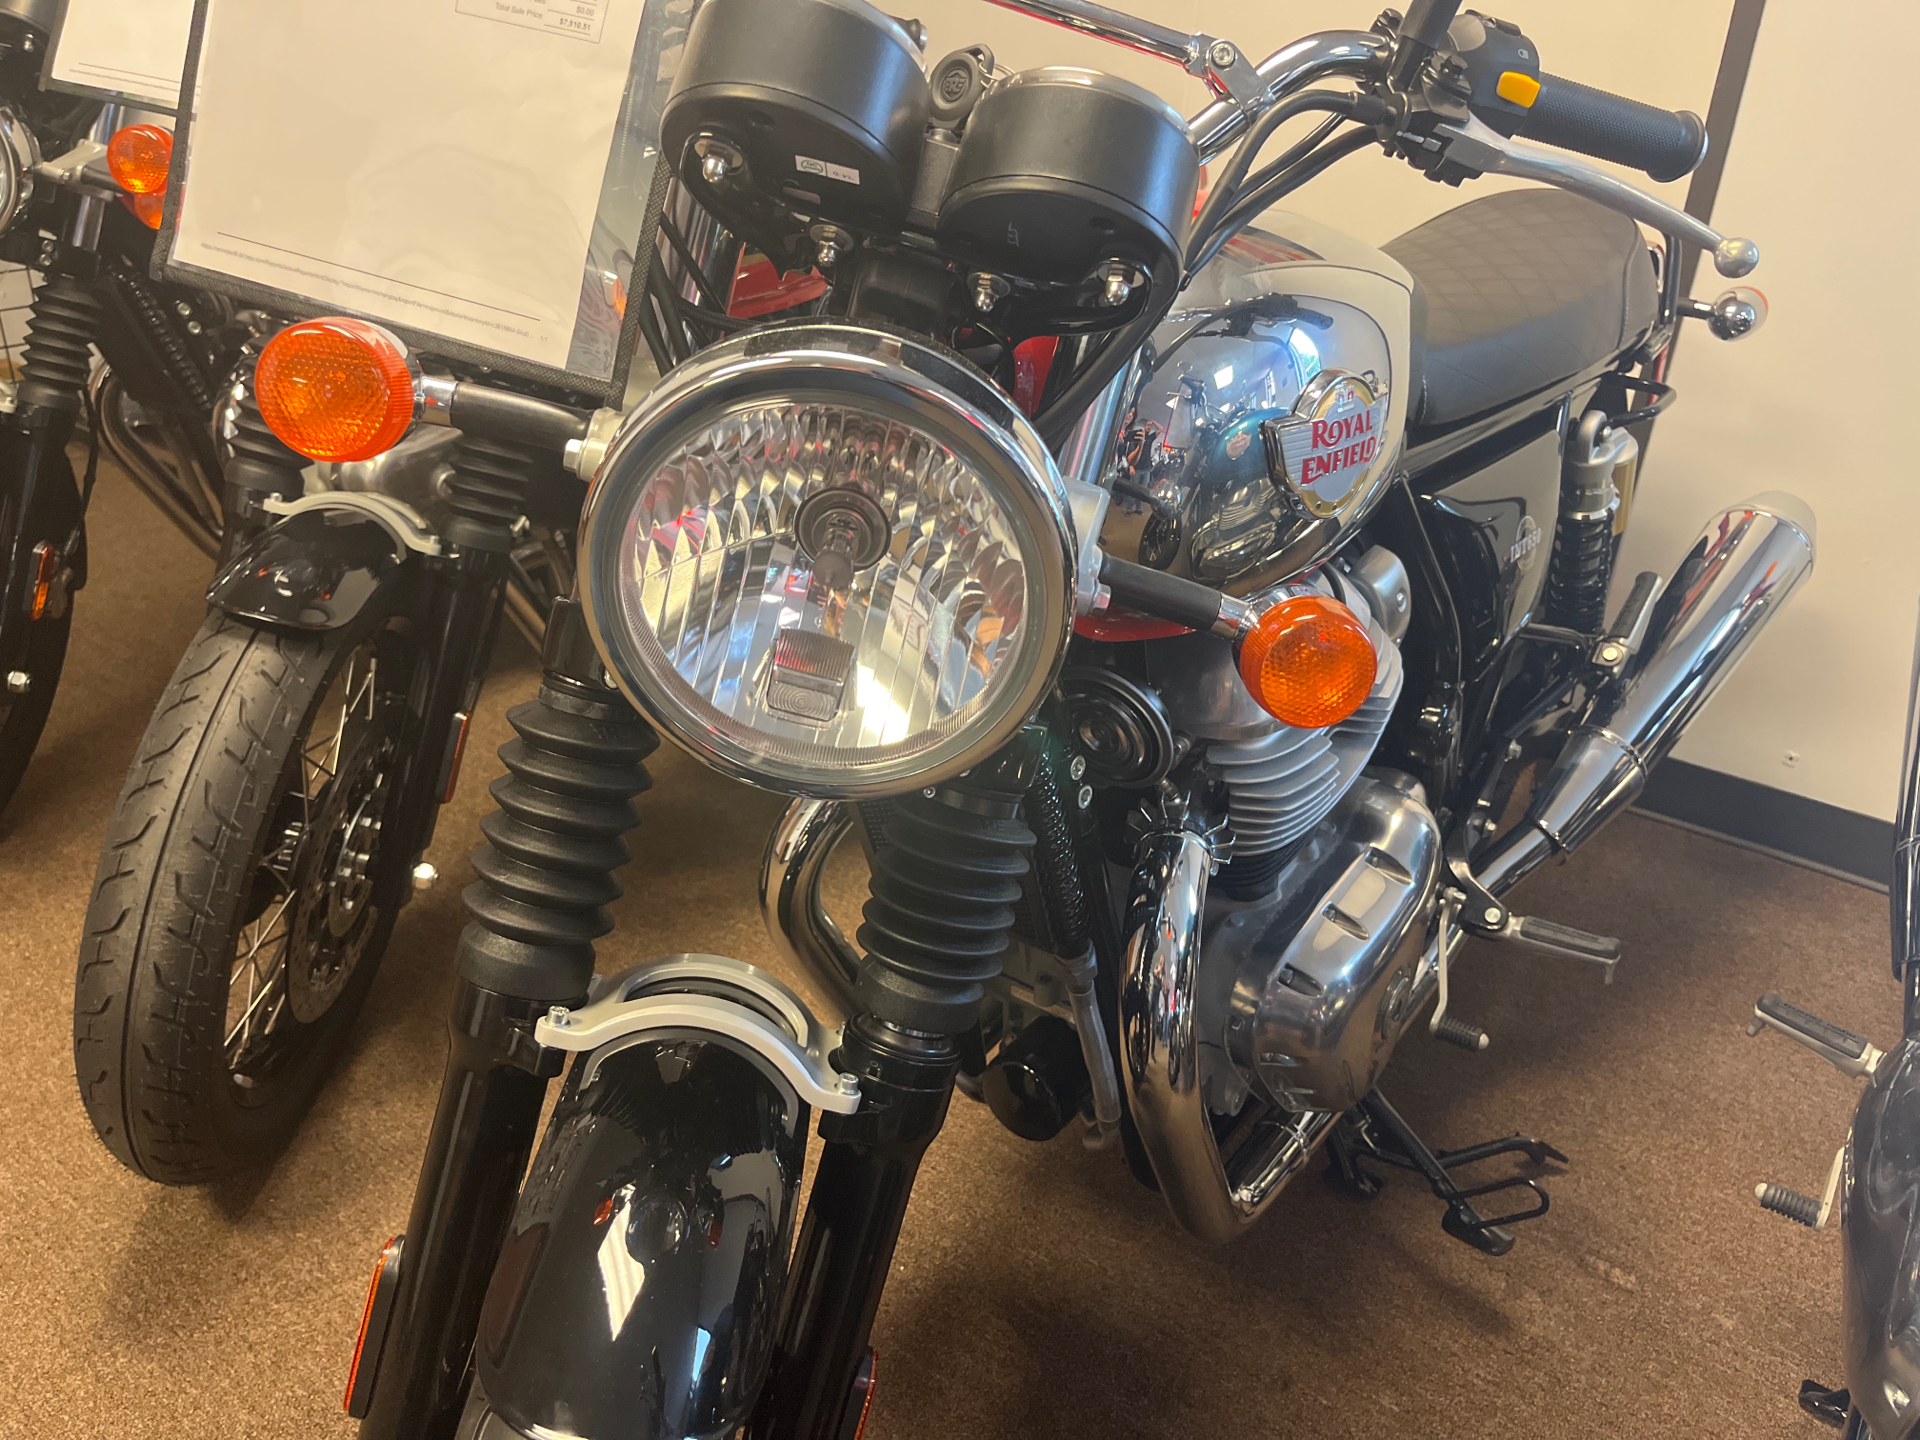 2022 Royal Enfield INT650 in Fort Wayne, Indiana - Photo 2